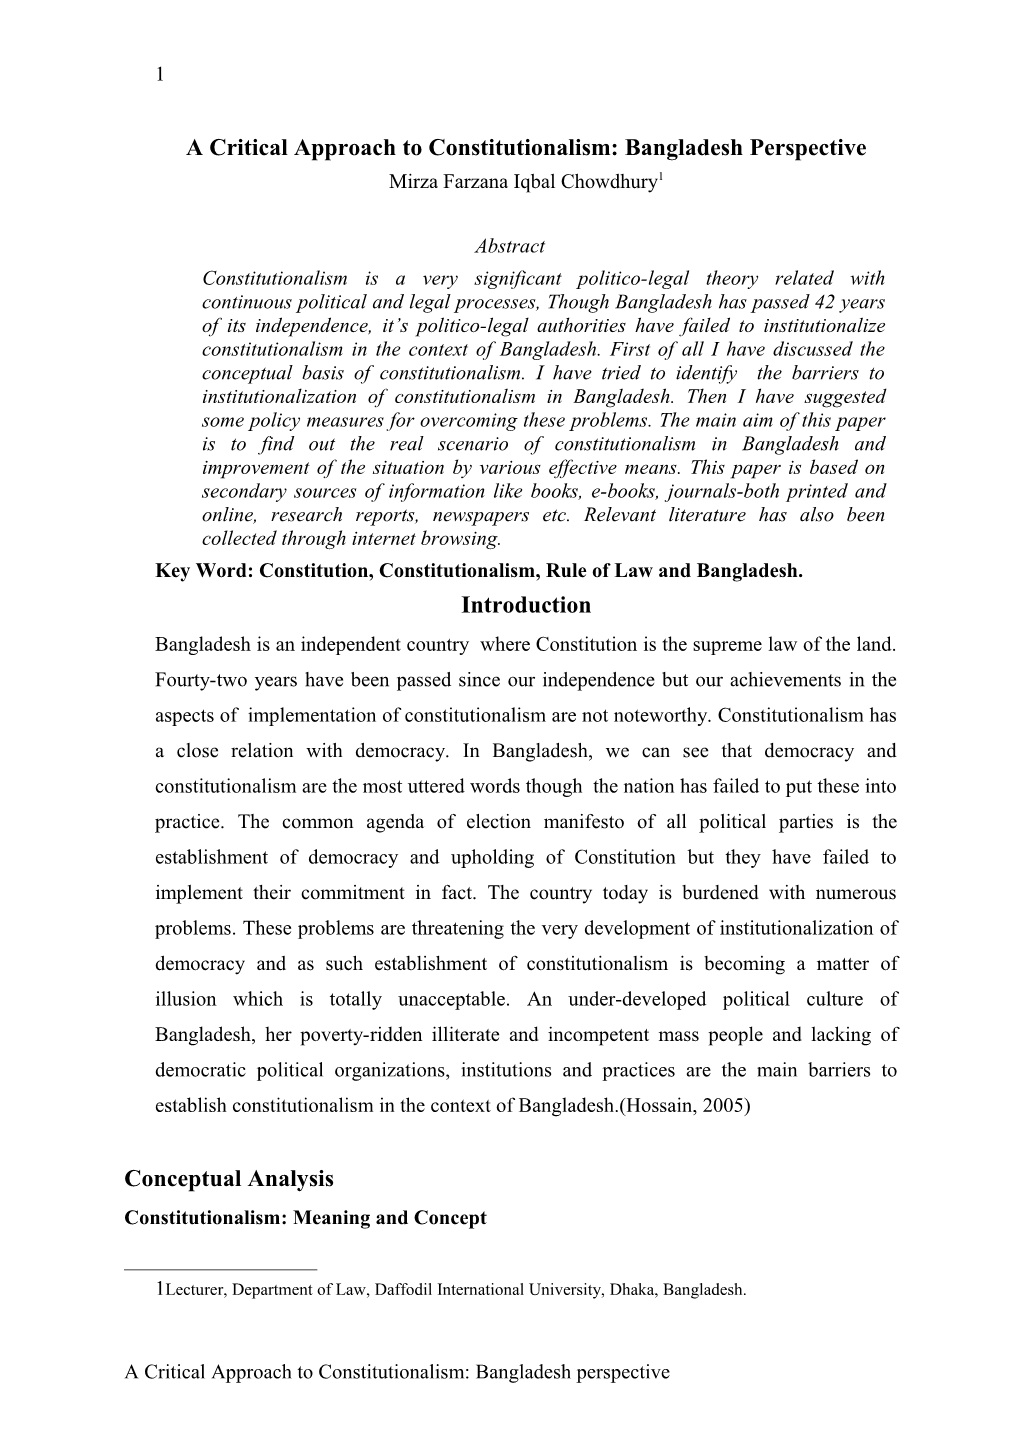 A Critical Approach to Constitutionalism: Bangladesh Perspective